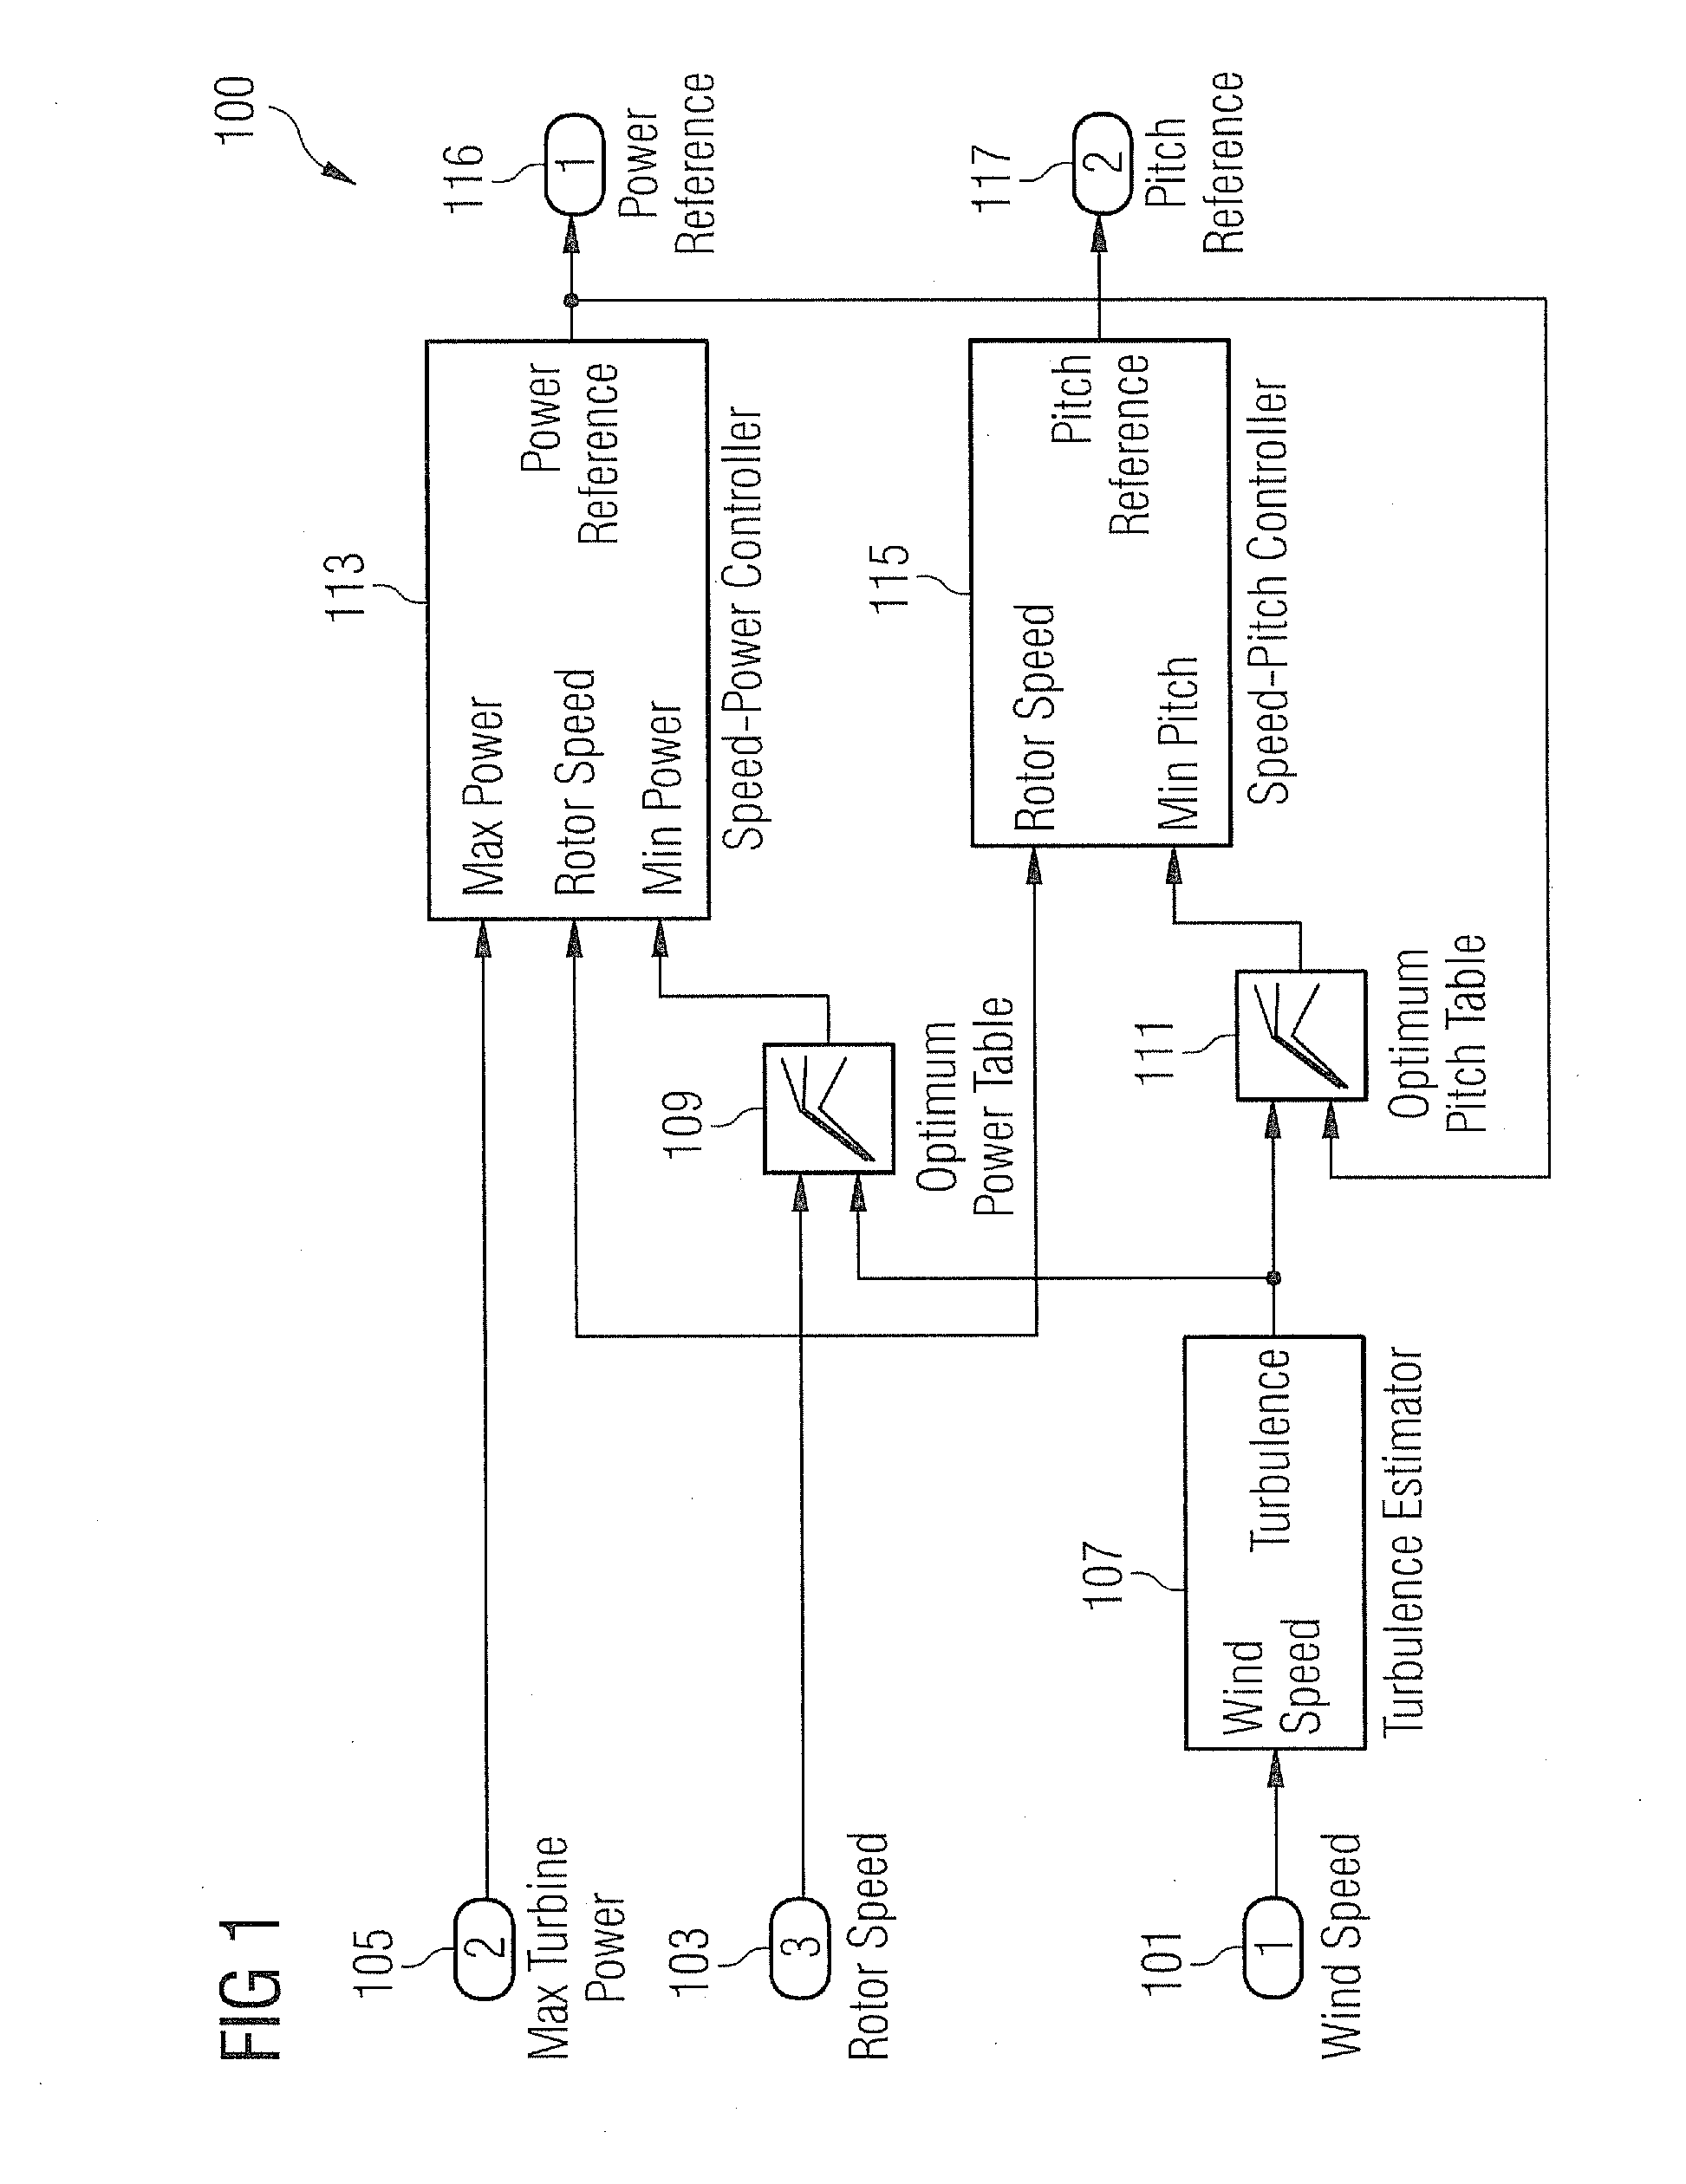 Method and system for adjusting a power parameter of a wind turbine